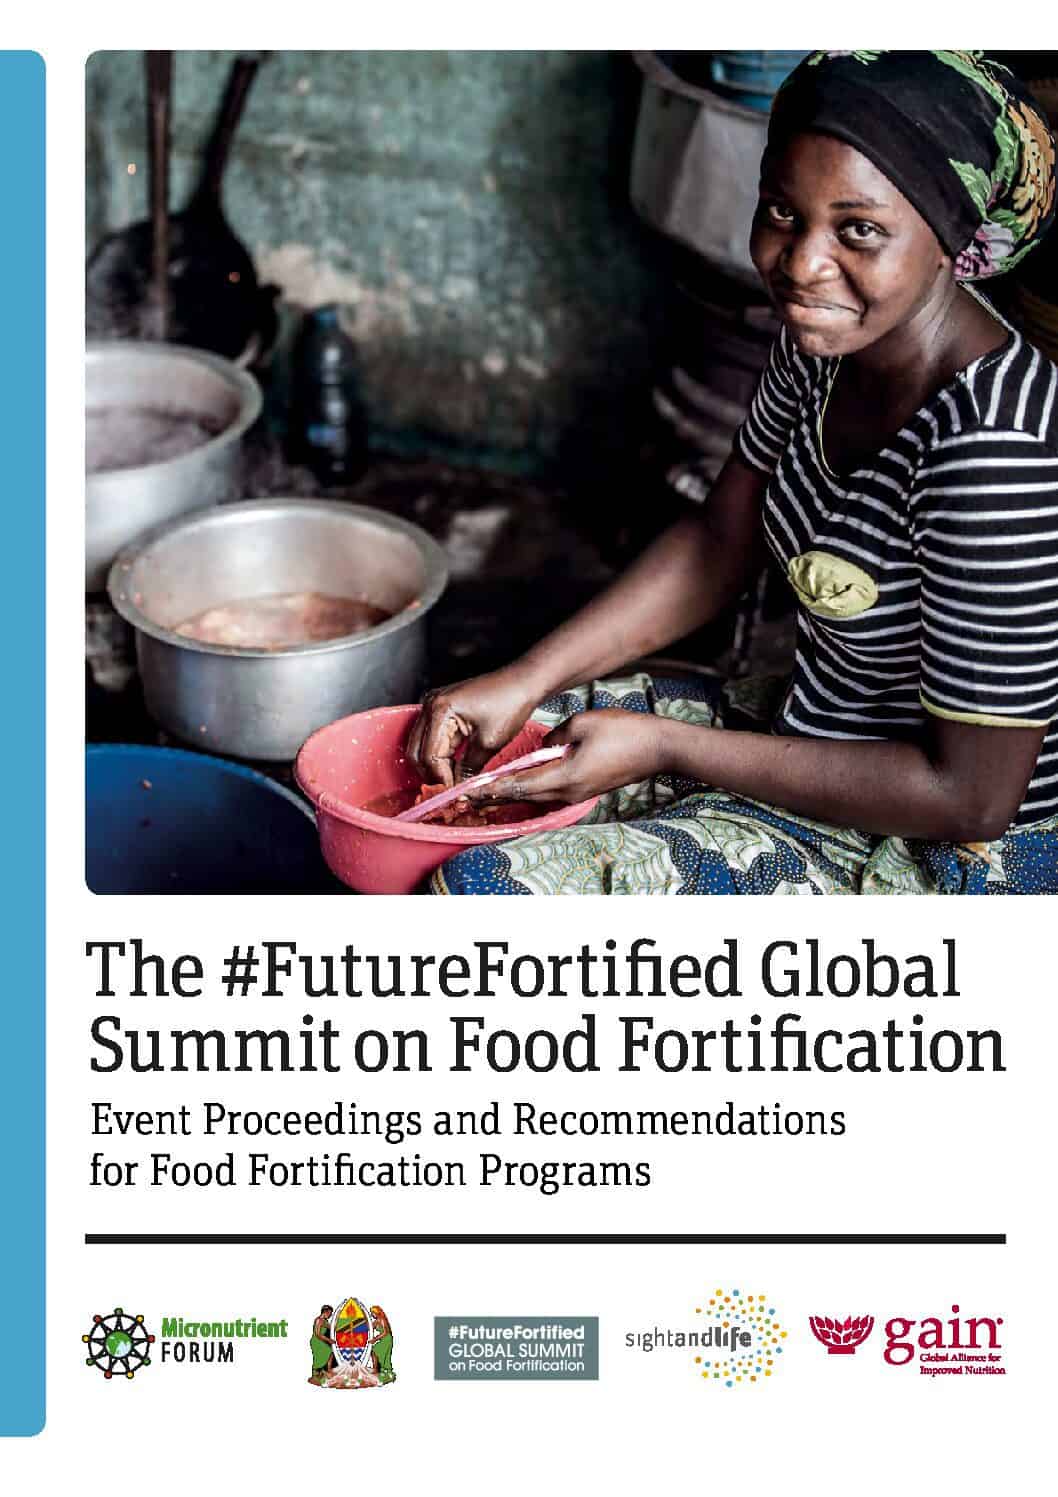 The #FutureFortified Global Summit on Food Fortification Event Proceedings and Recommendations for Food Fortification Programs thumbnail